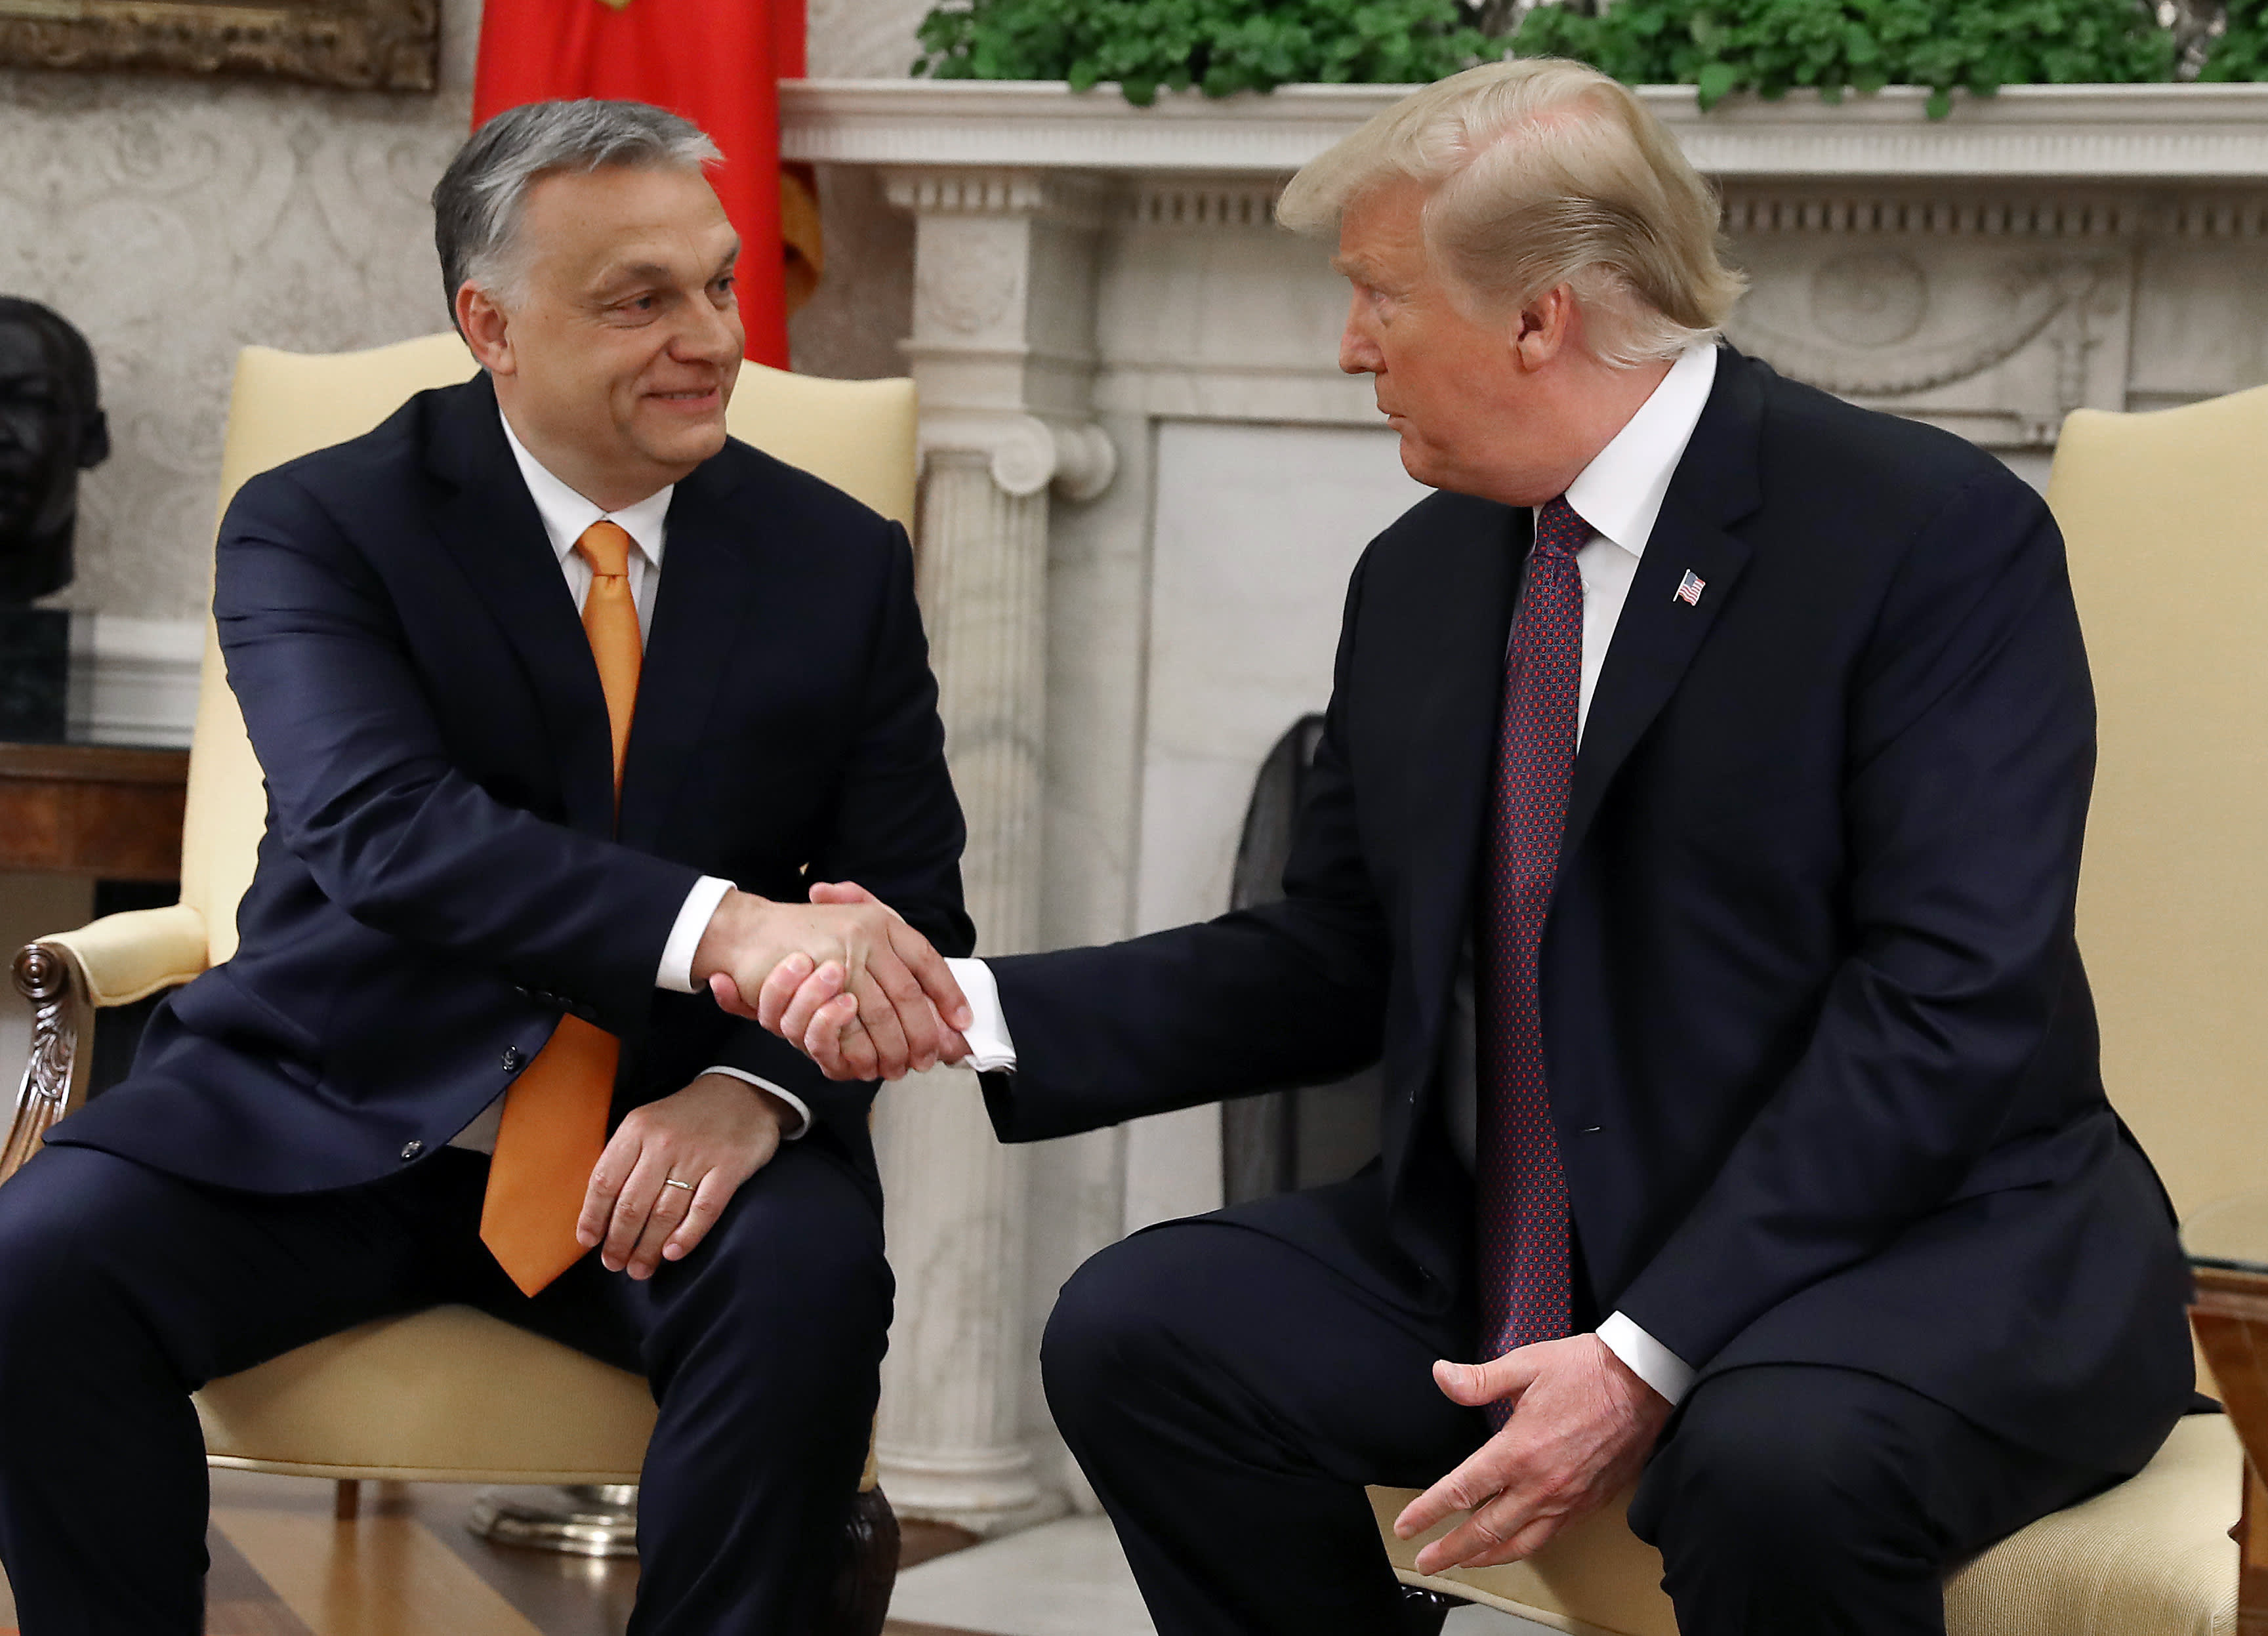 US election: Viktor Orbán of Hungary wants Donald Trump to win